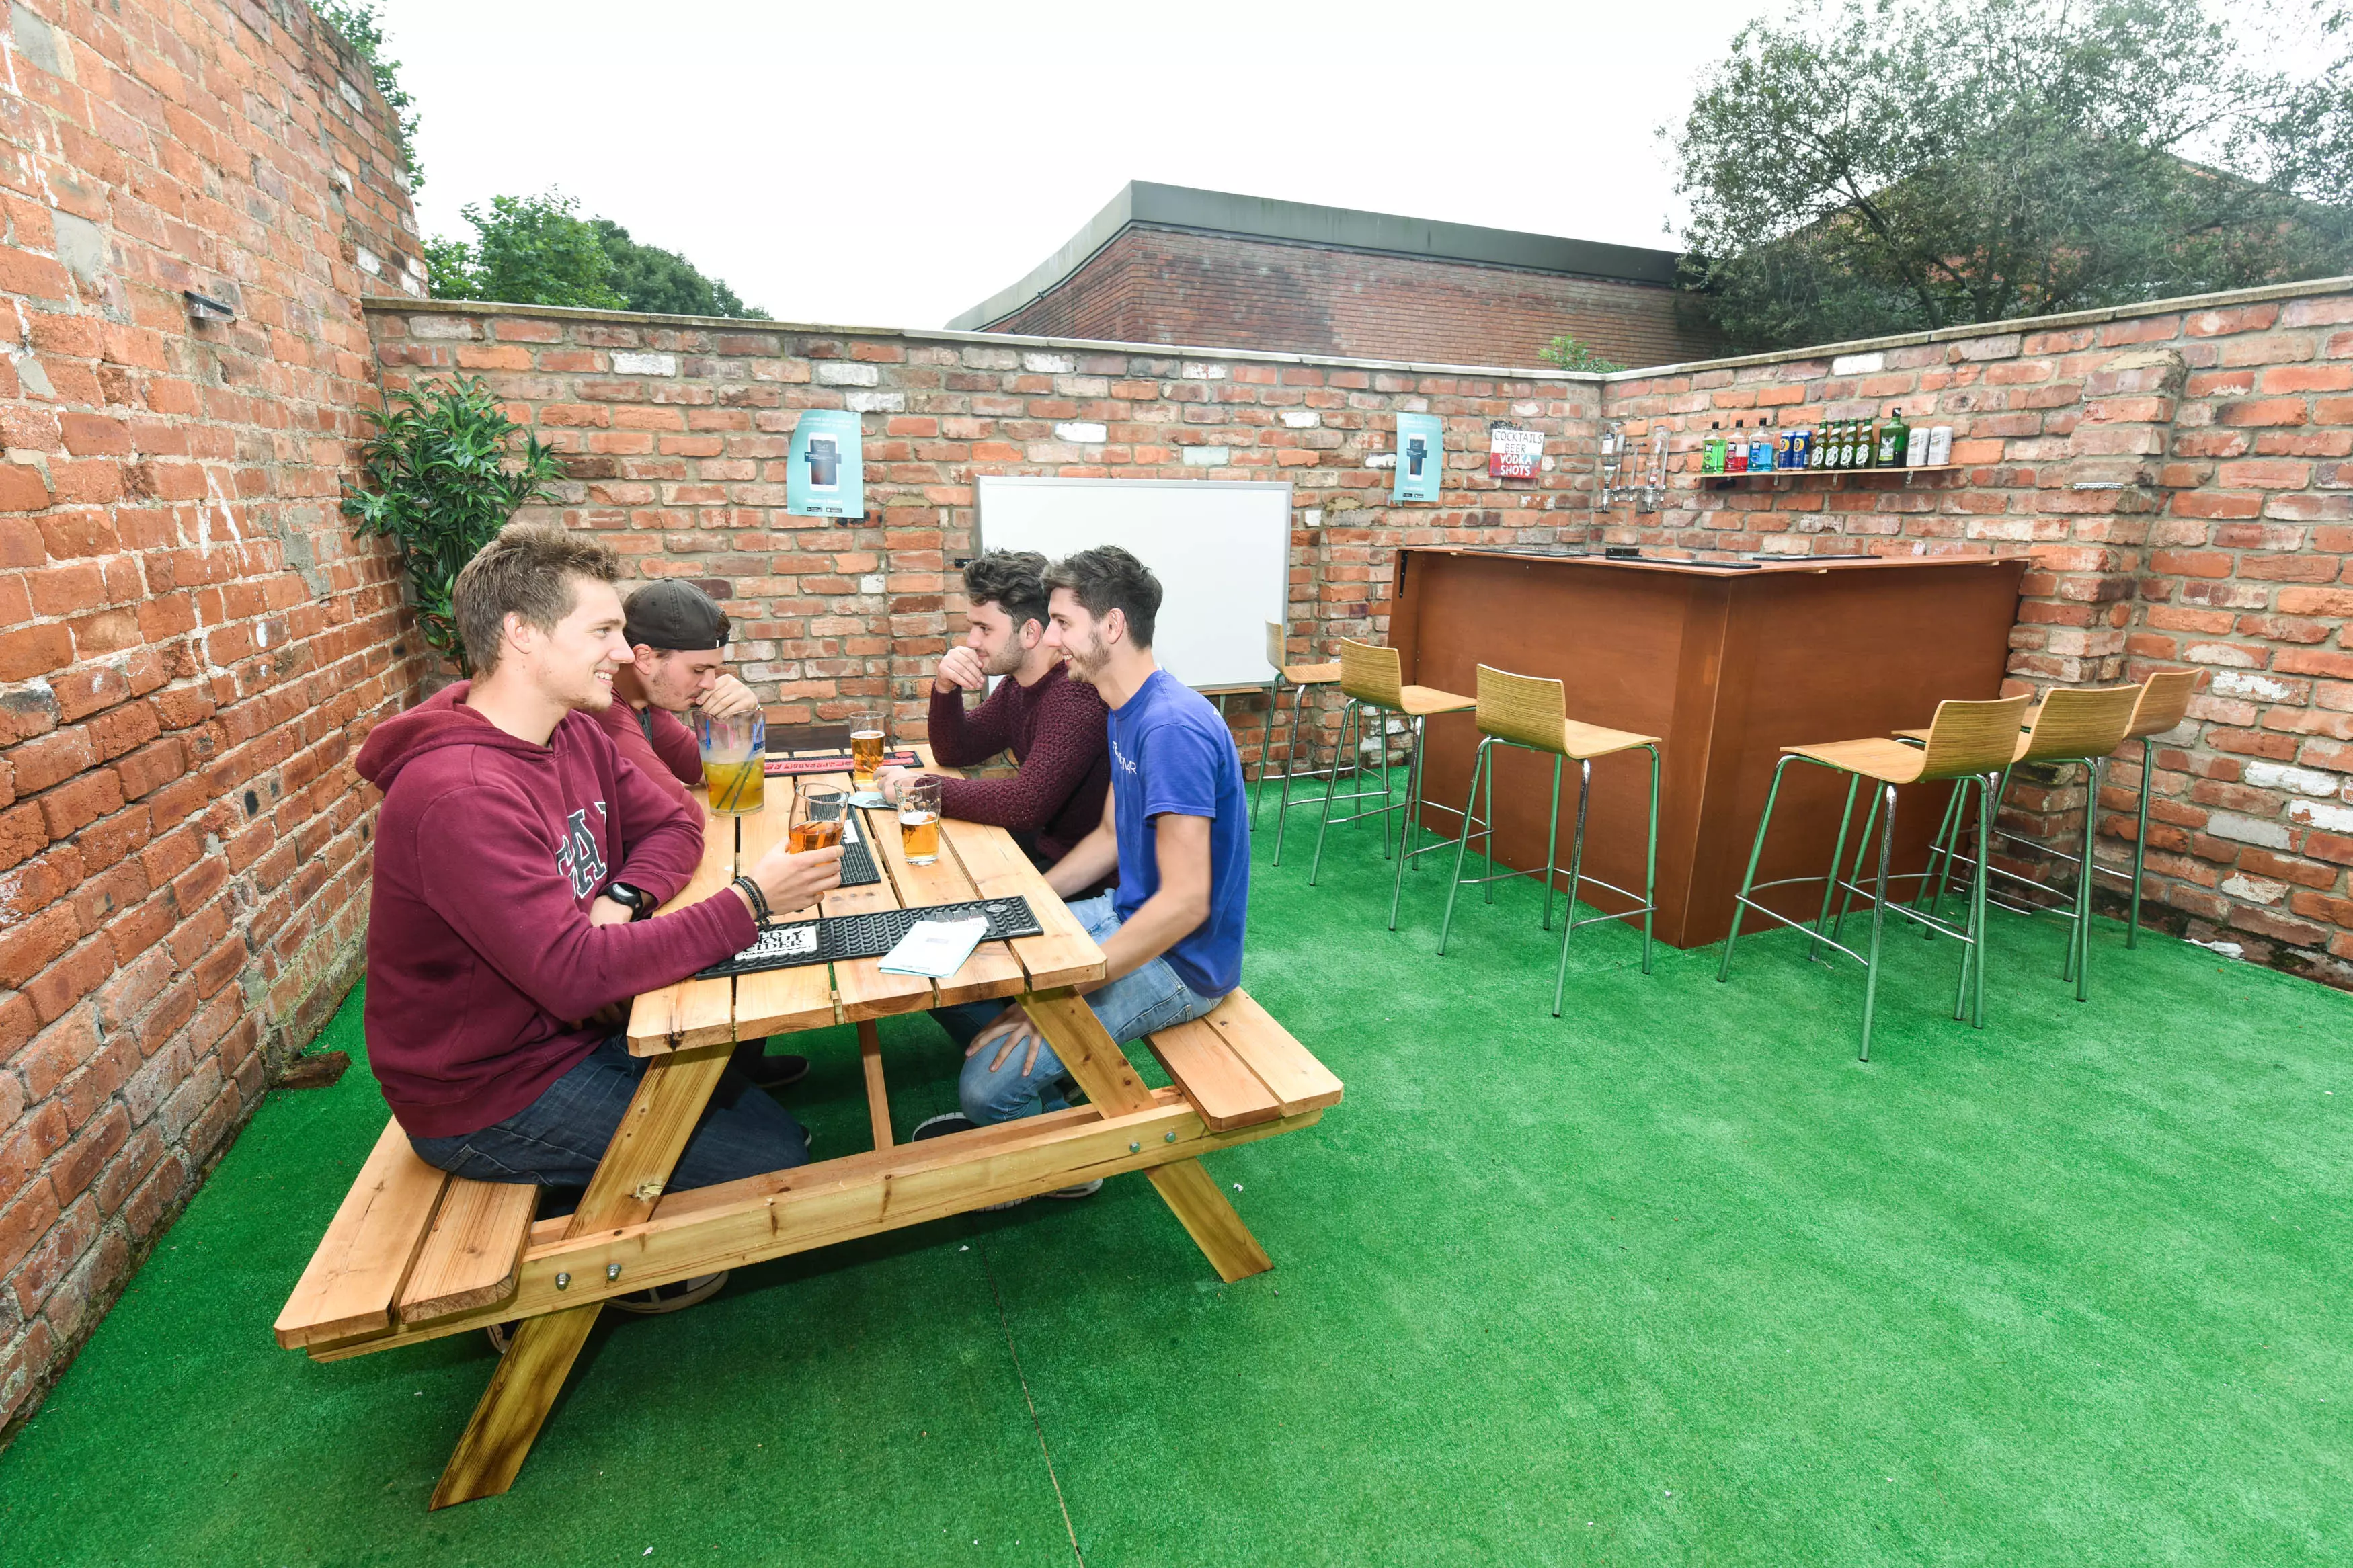 Student Builds A Beer Garden For His Housemates And It's Amazing